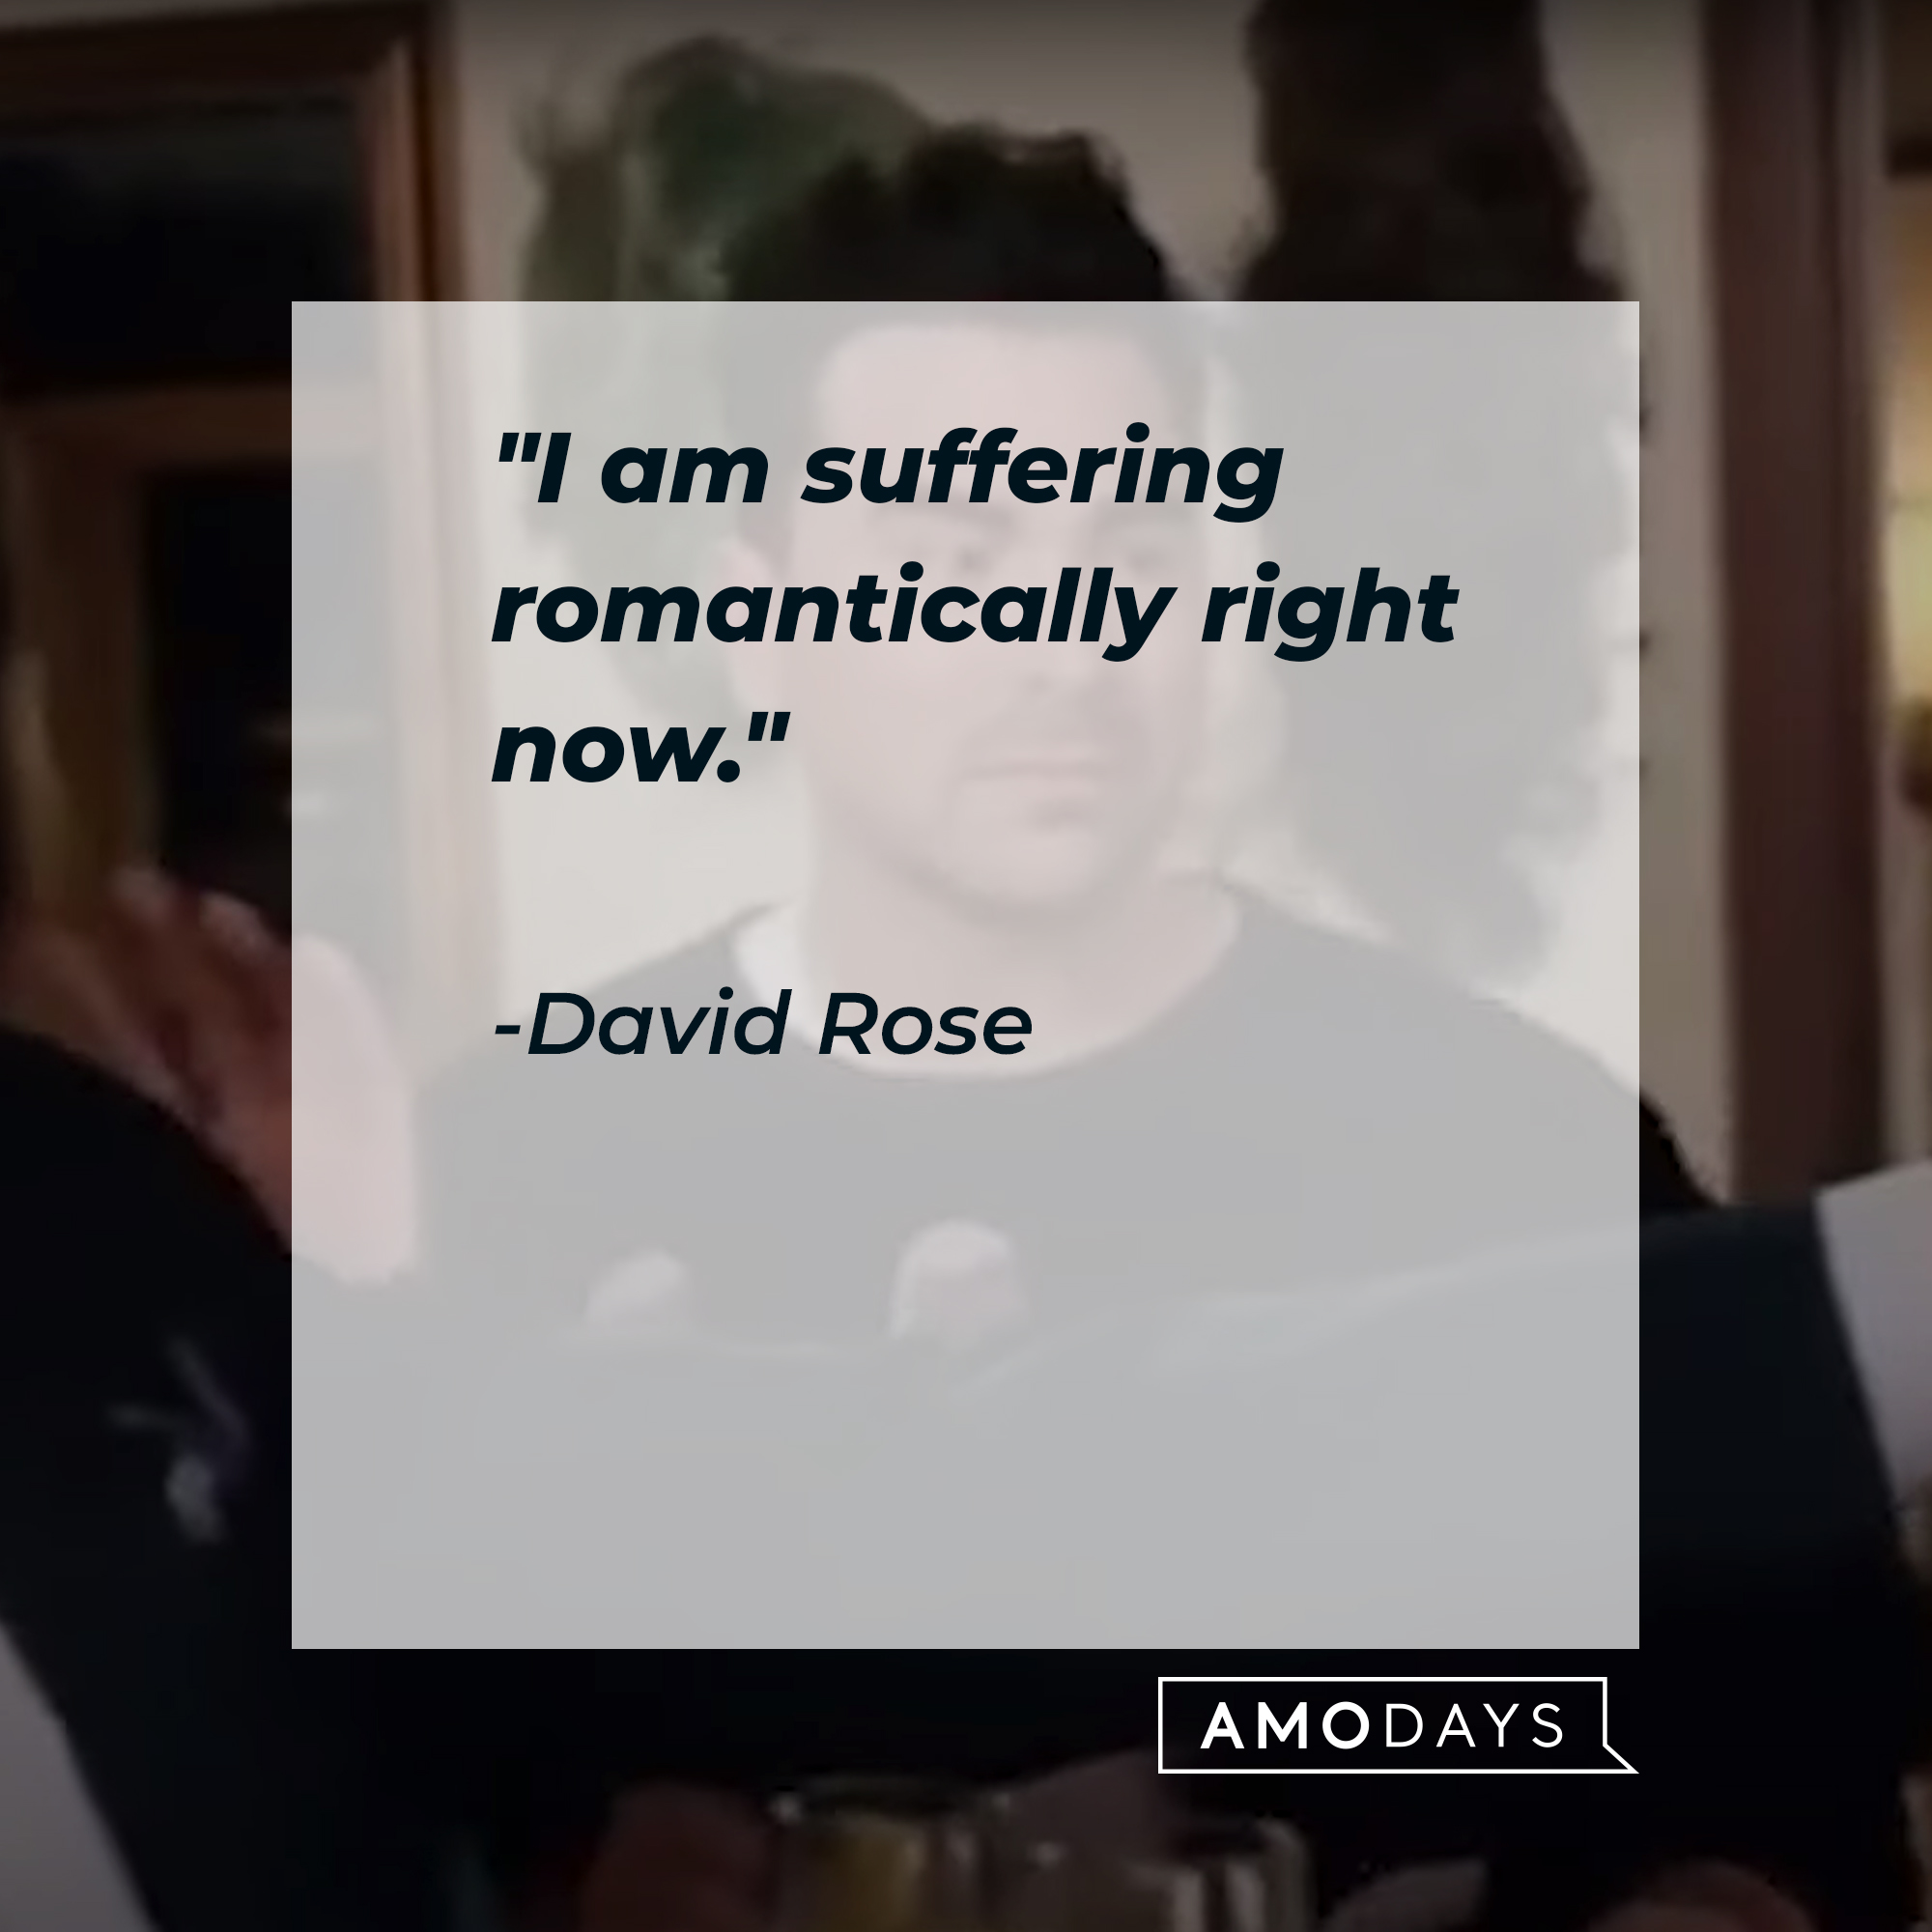 A photo of David rose with the quote, "I am suffering romantically right now." | Source: YouTube/PopTVVideo